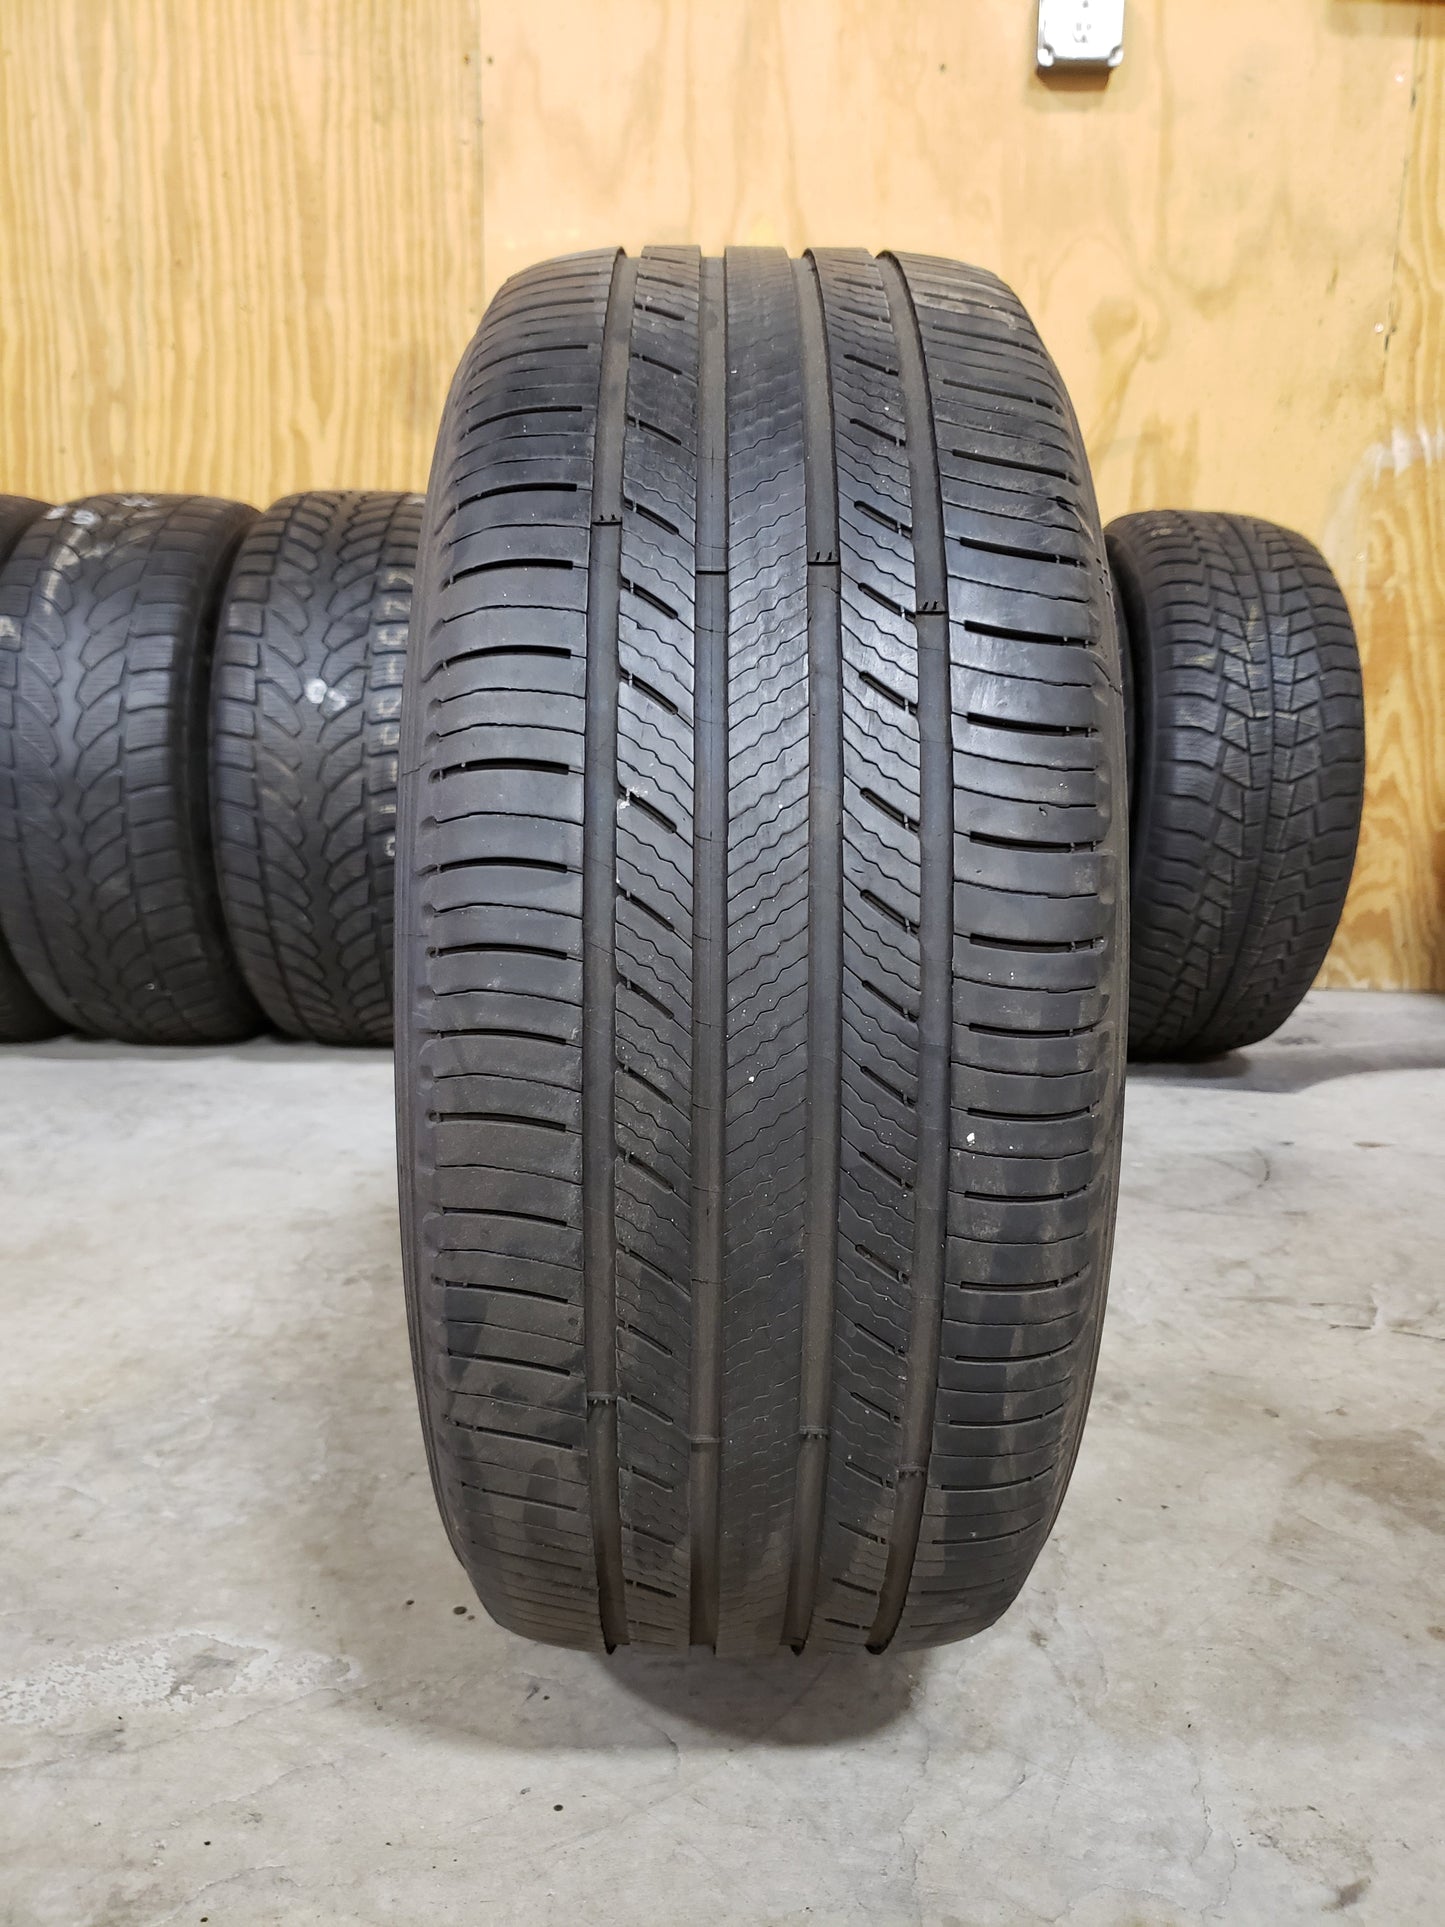 SINGLE 225/55R16 Michelin Premier A/S 95H XL - Used Tires